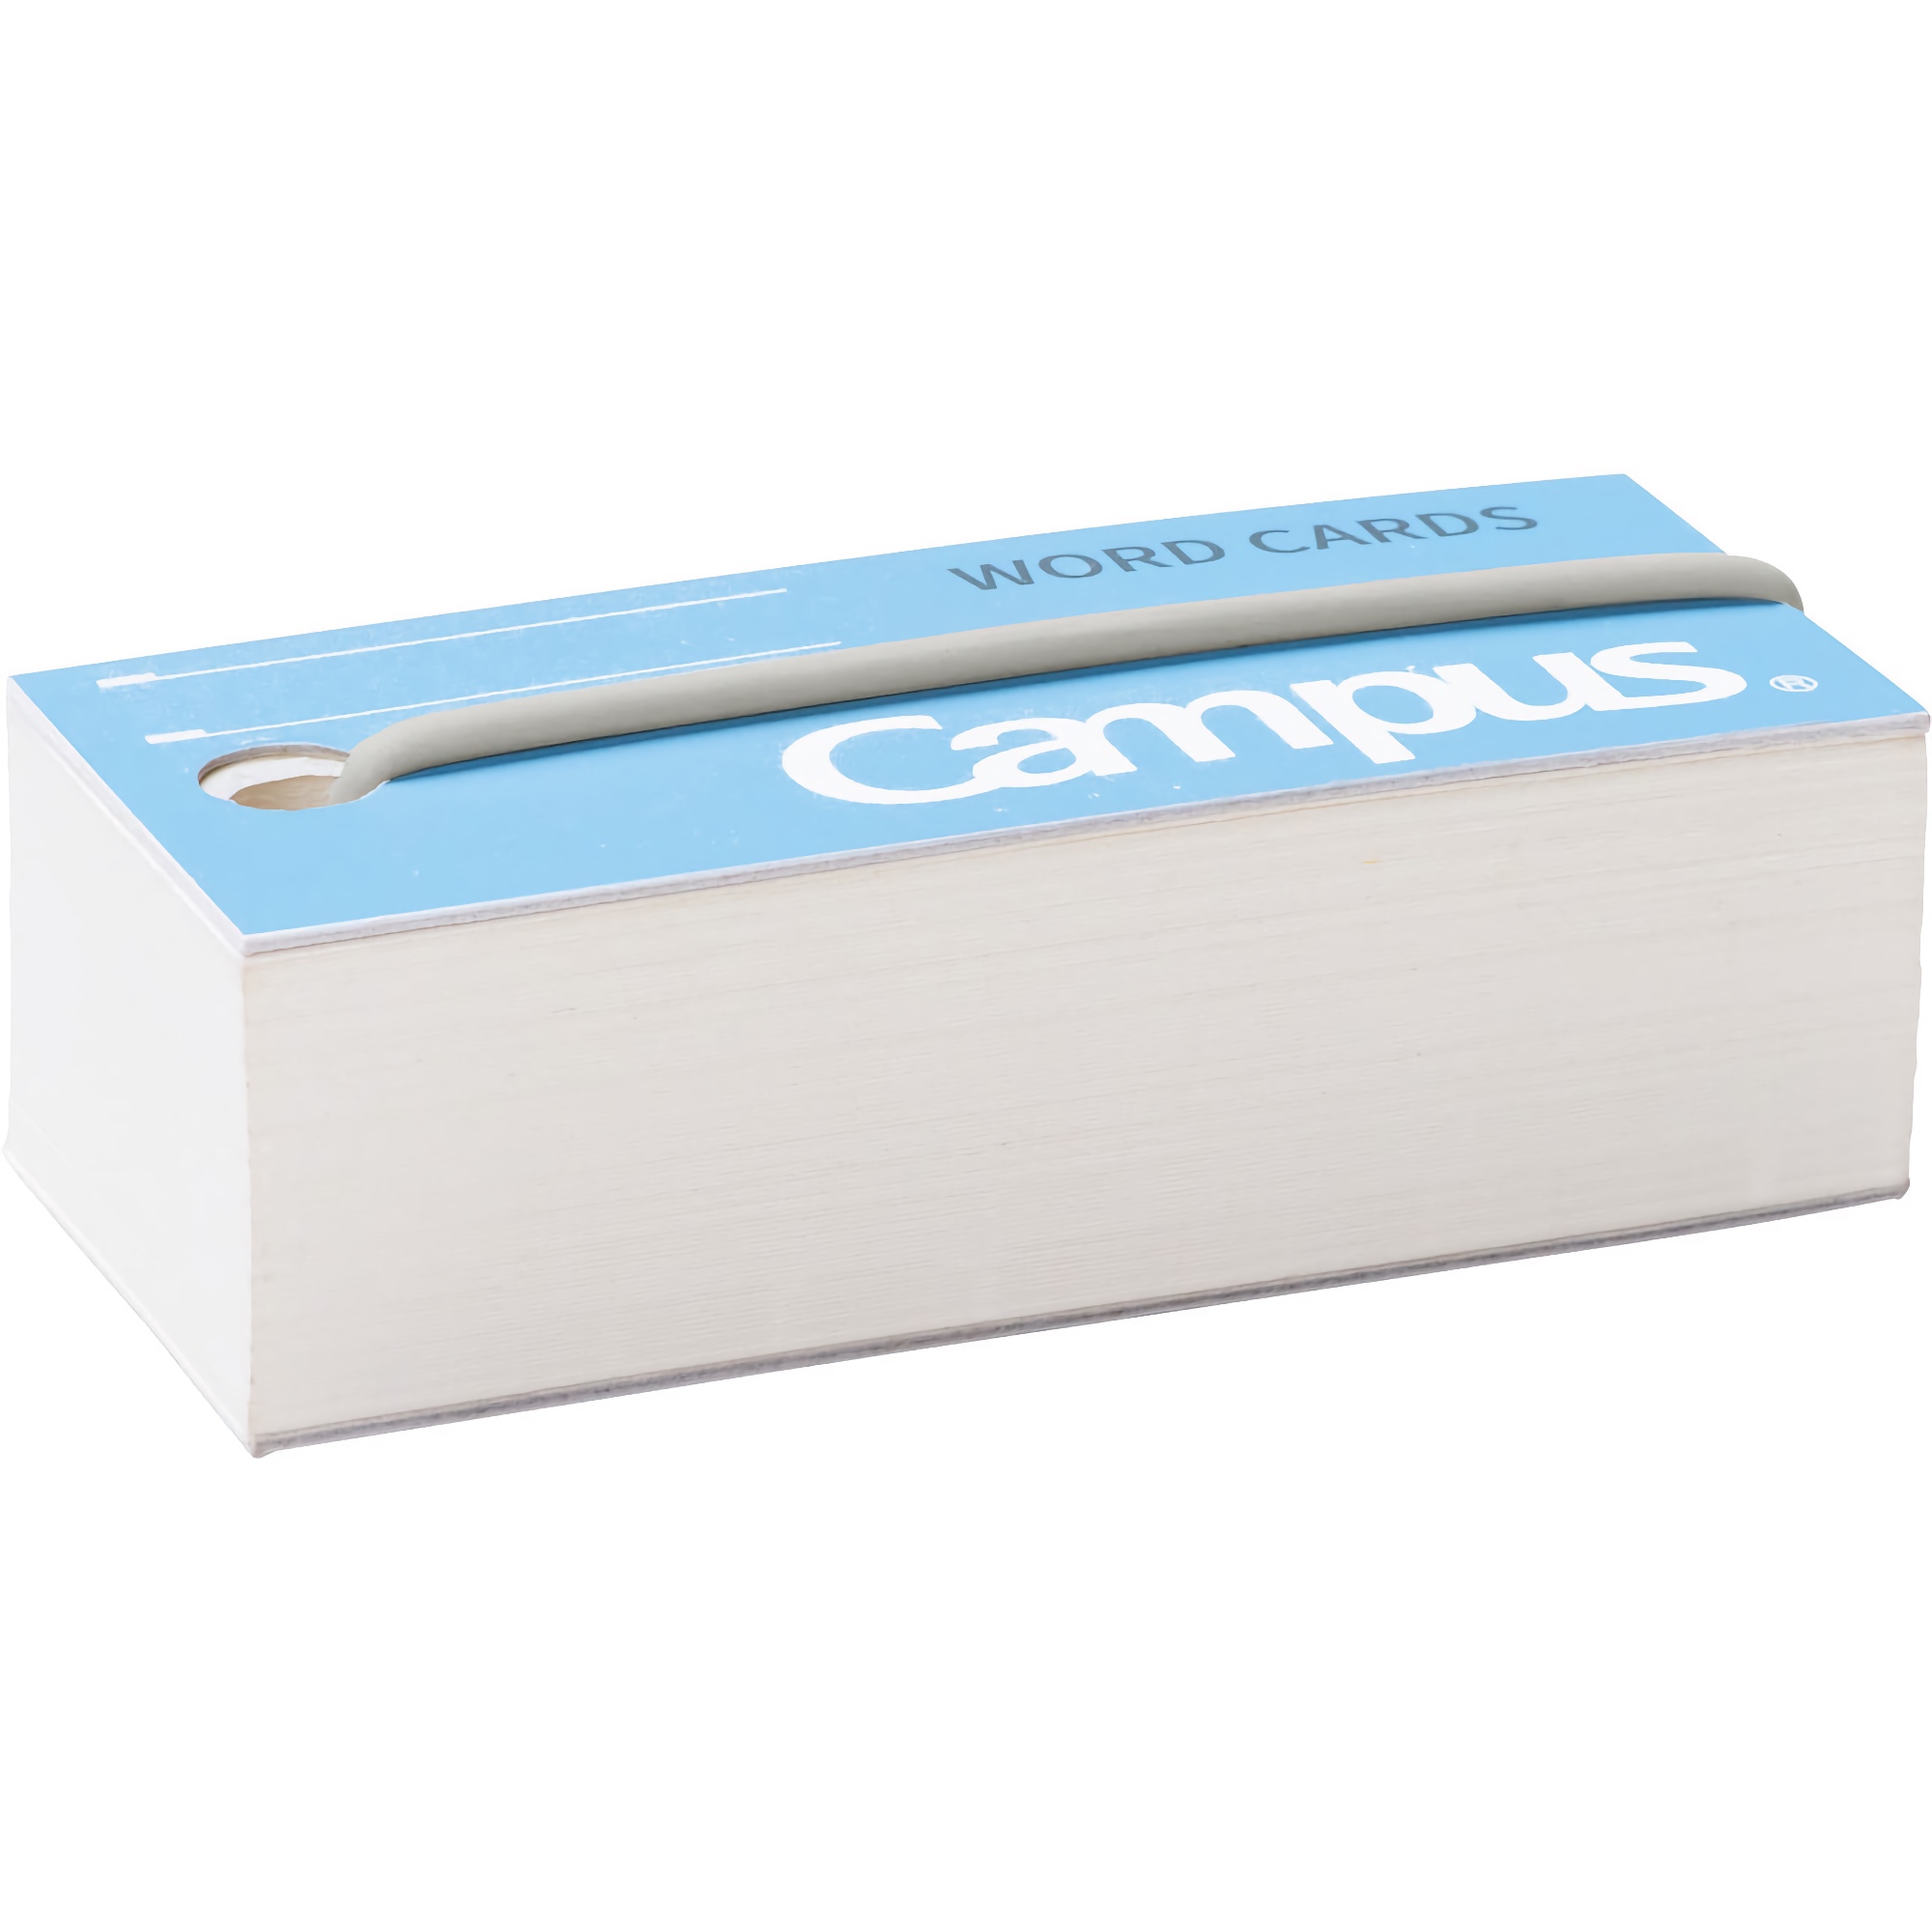 Kokuyo Campus Word Cards with Band Blå